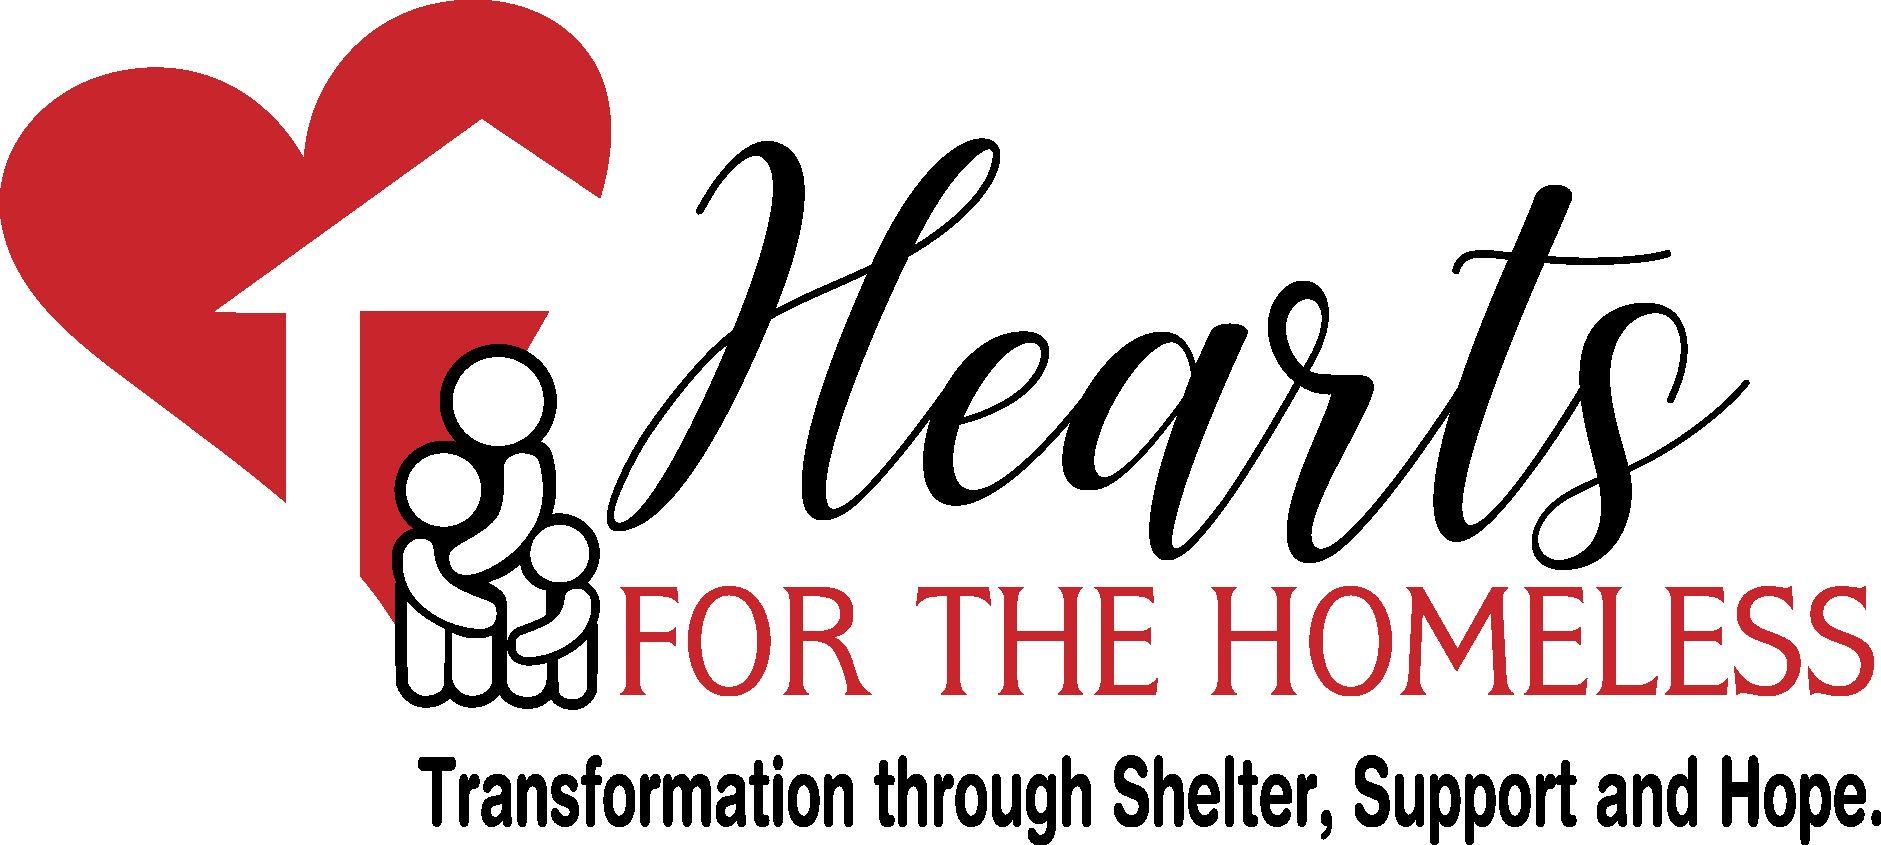 Homeless Logo - Hearts for the Homeless Logo Final from the Storm